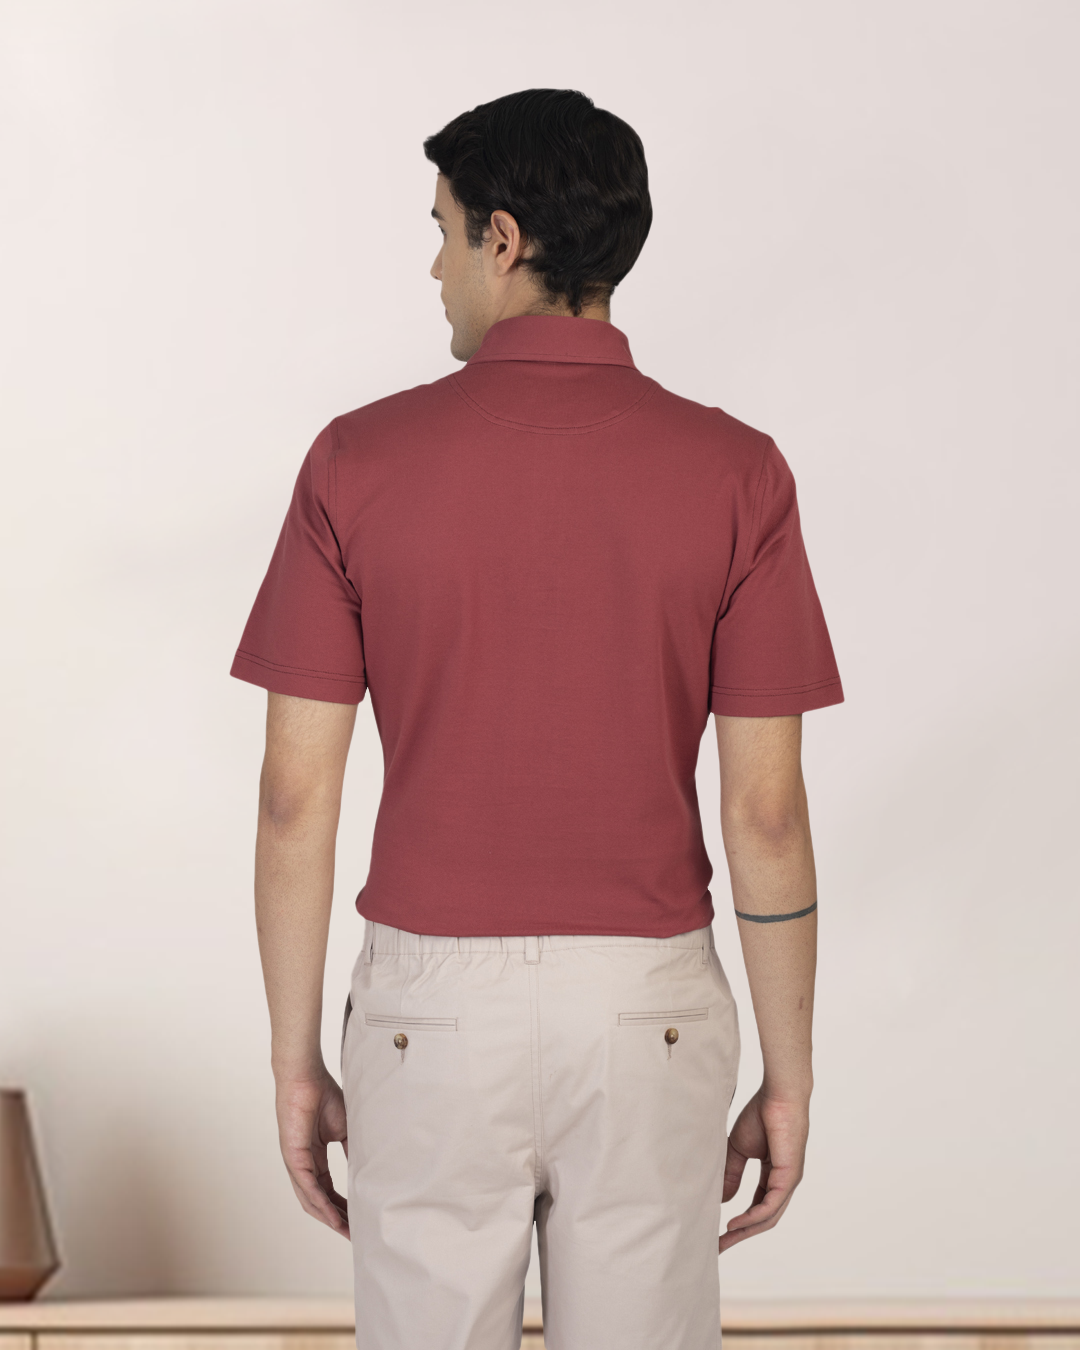 Back view of model wearing custom Genoa shorts for men by Luxire in pale green wearing red top